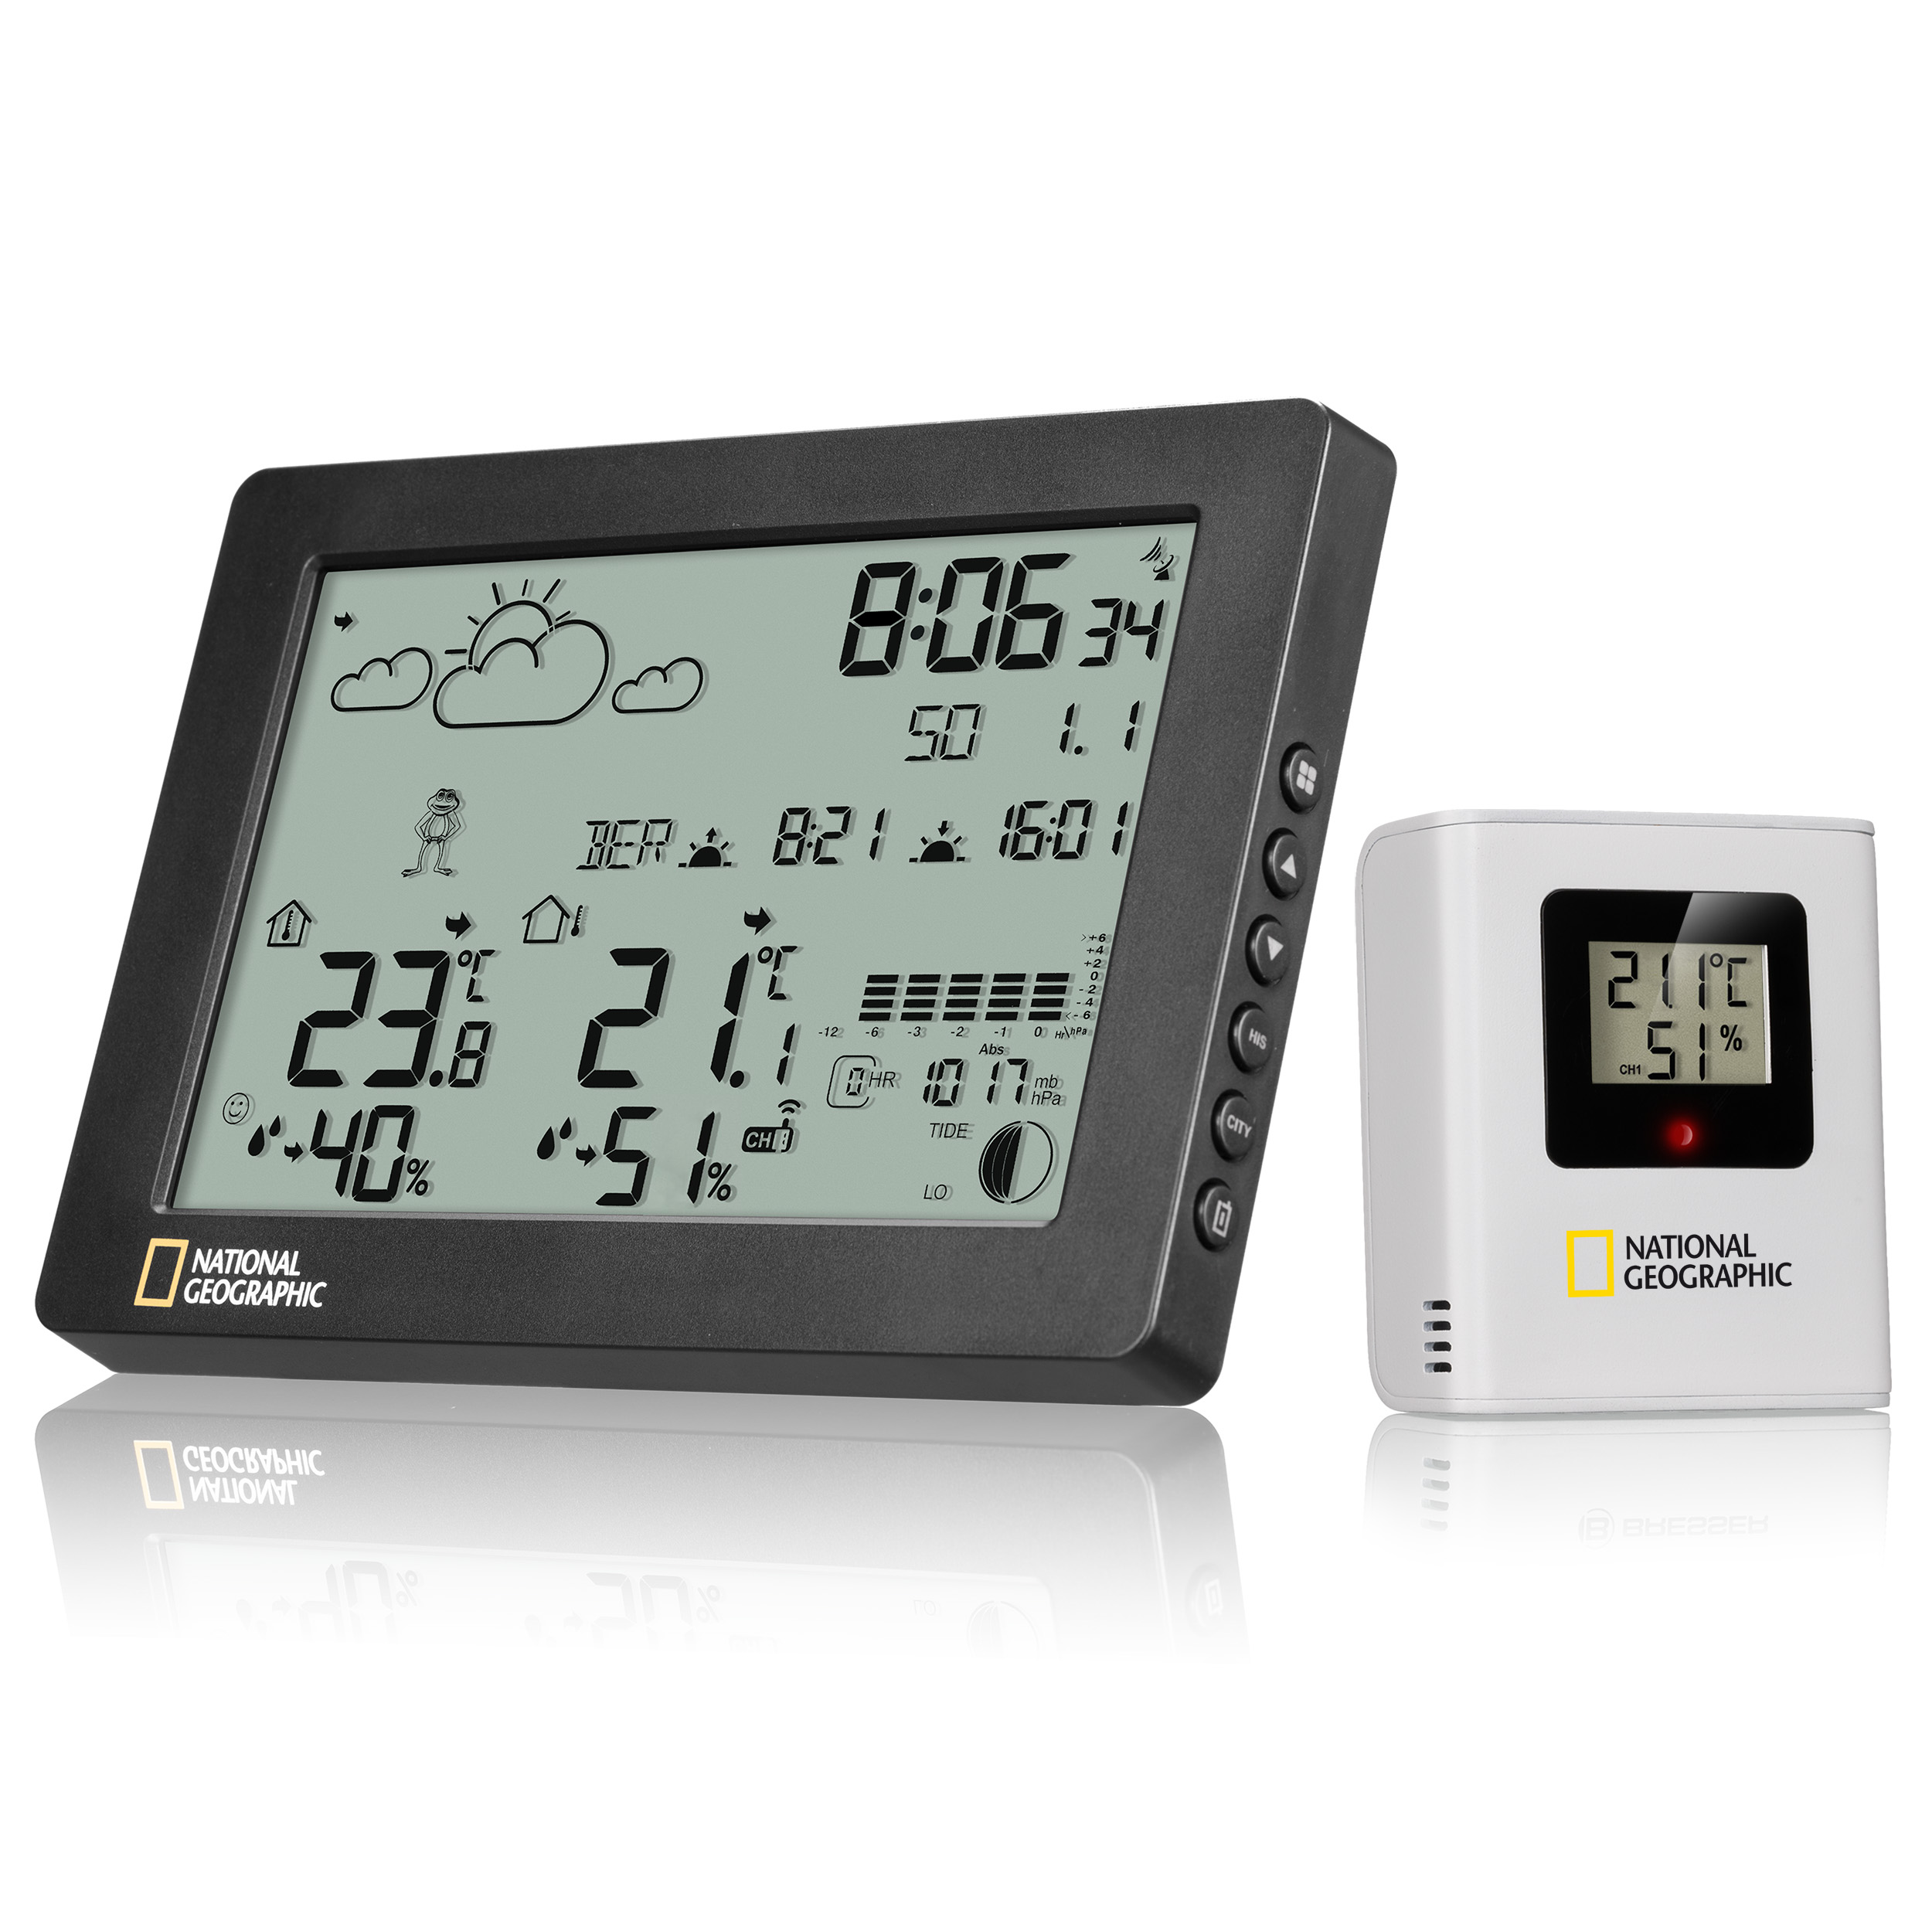 NATIONAL GEOGRAPHIC BaroTemp HZ weather station (Refurbished)